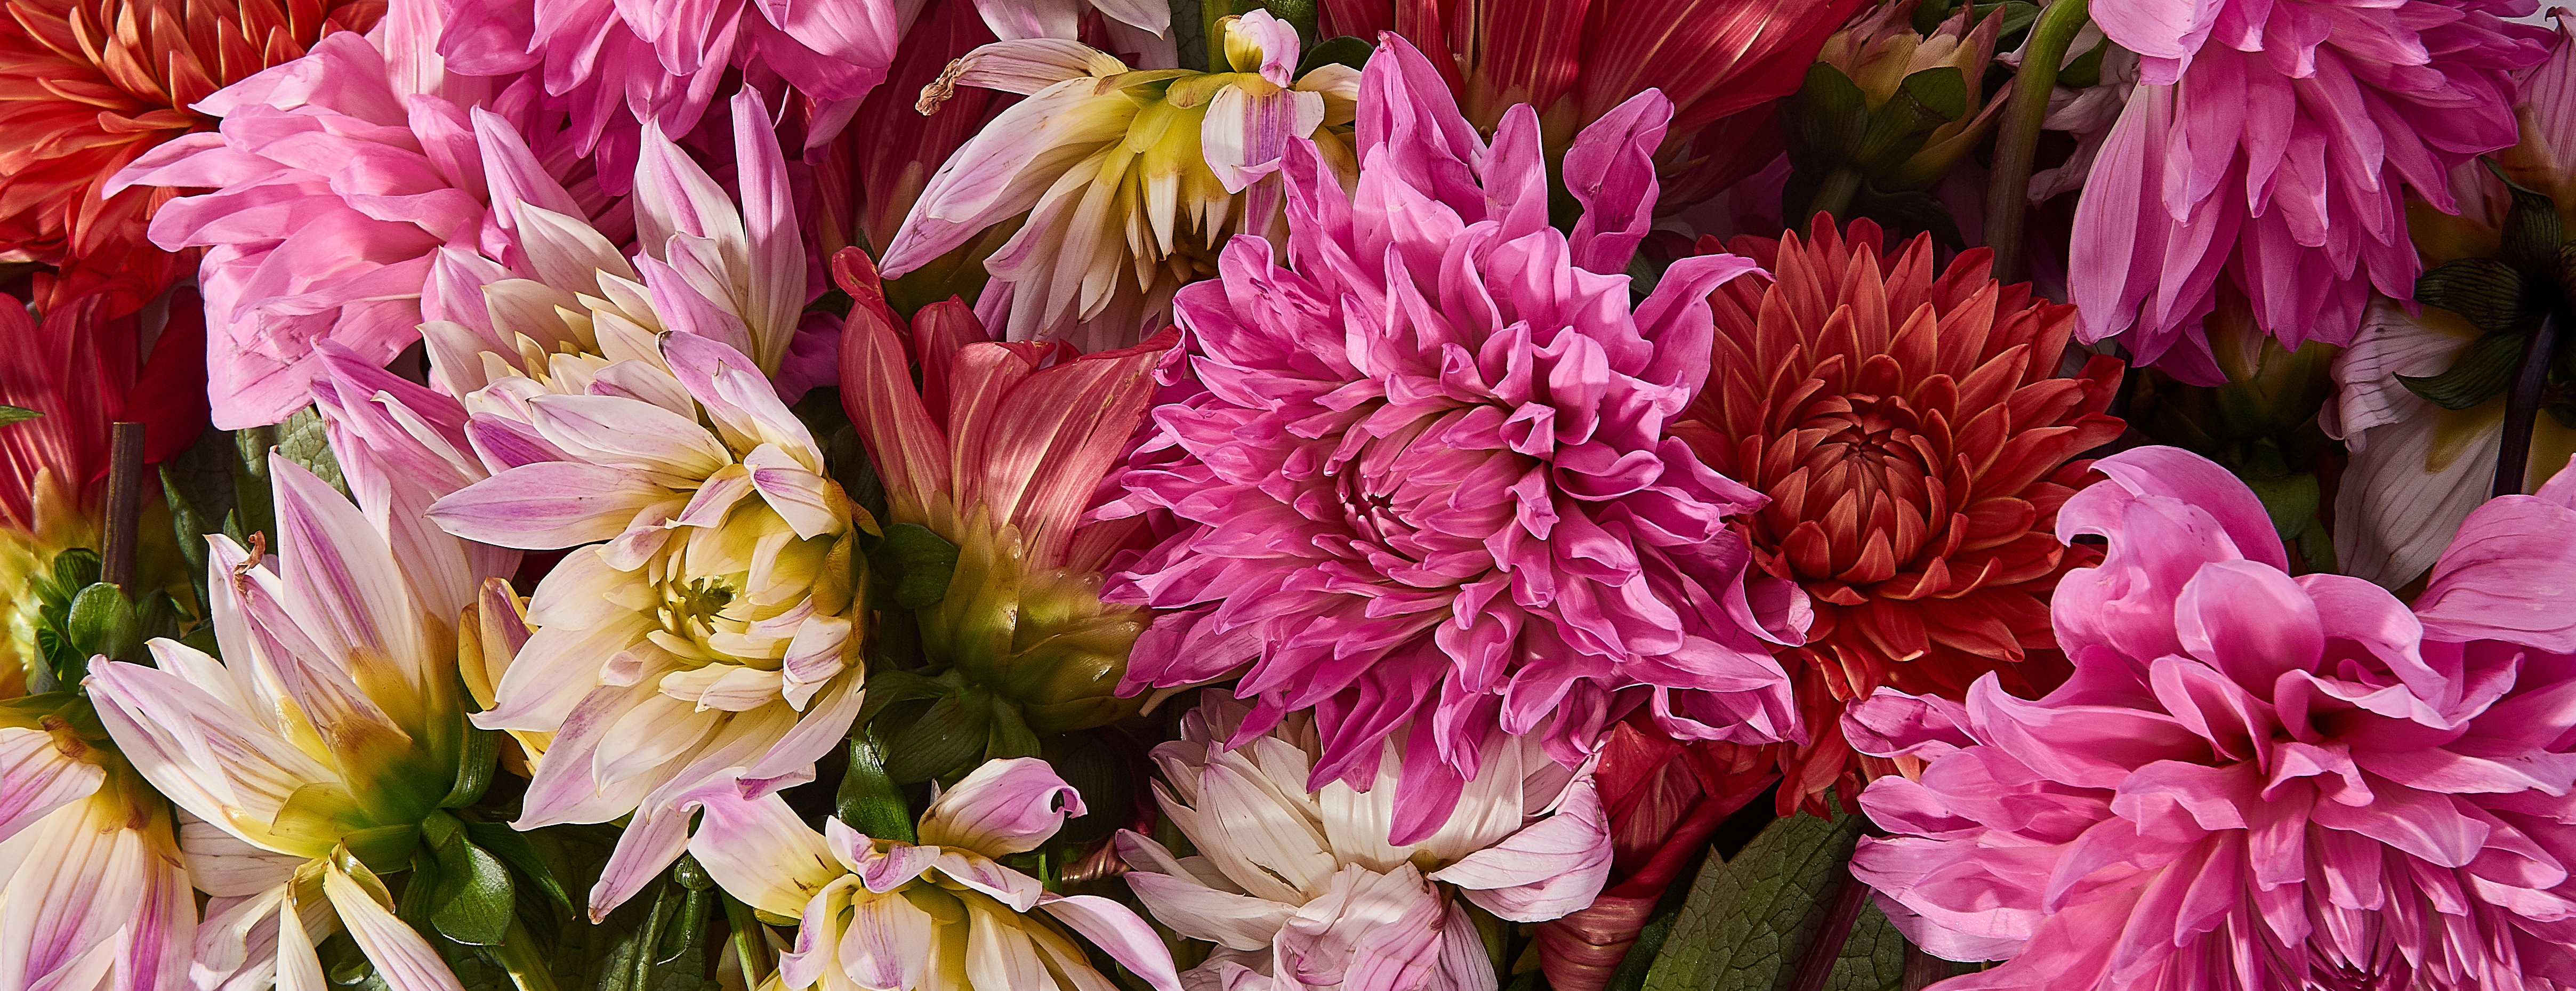 Multicolored dahlias in shades of pink and red